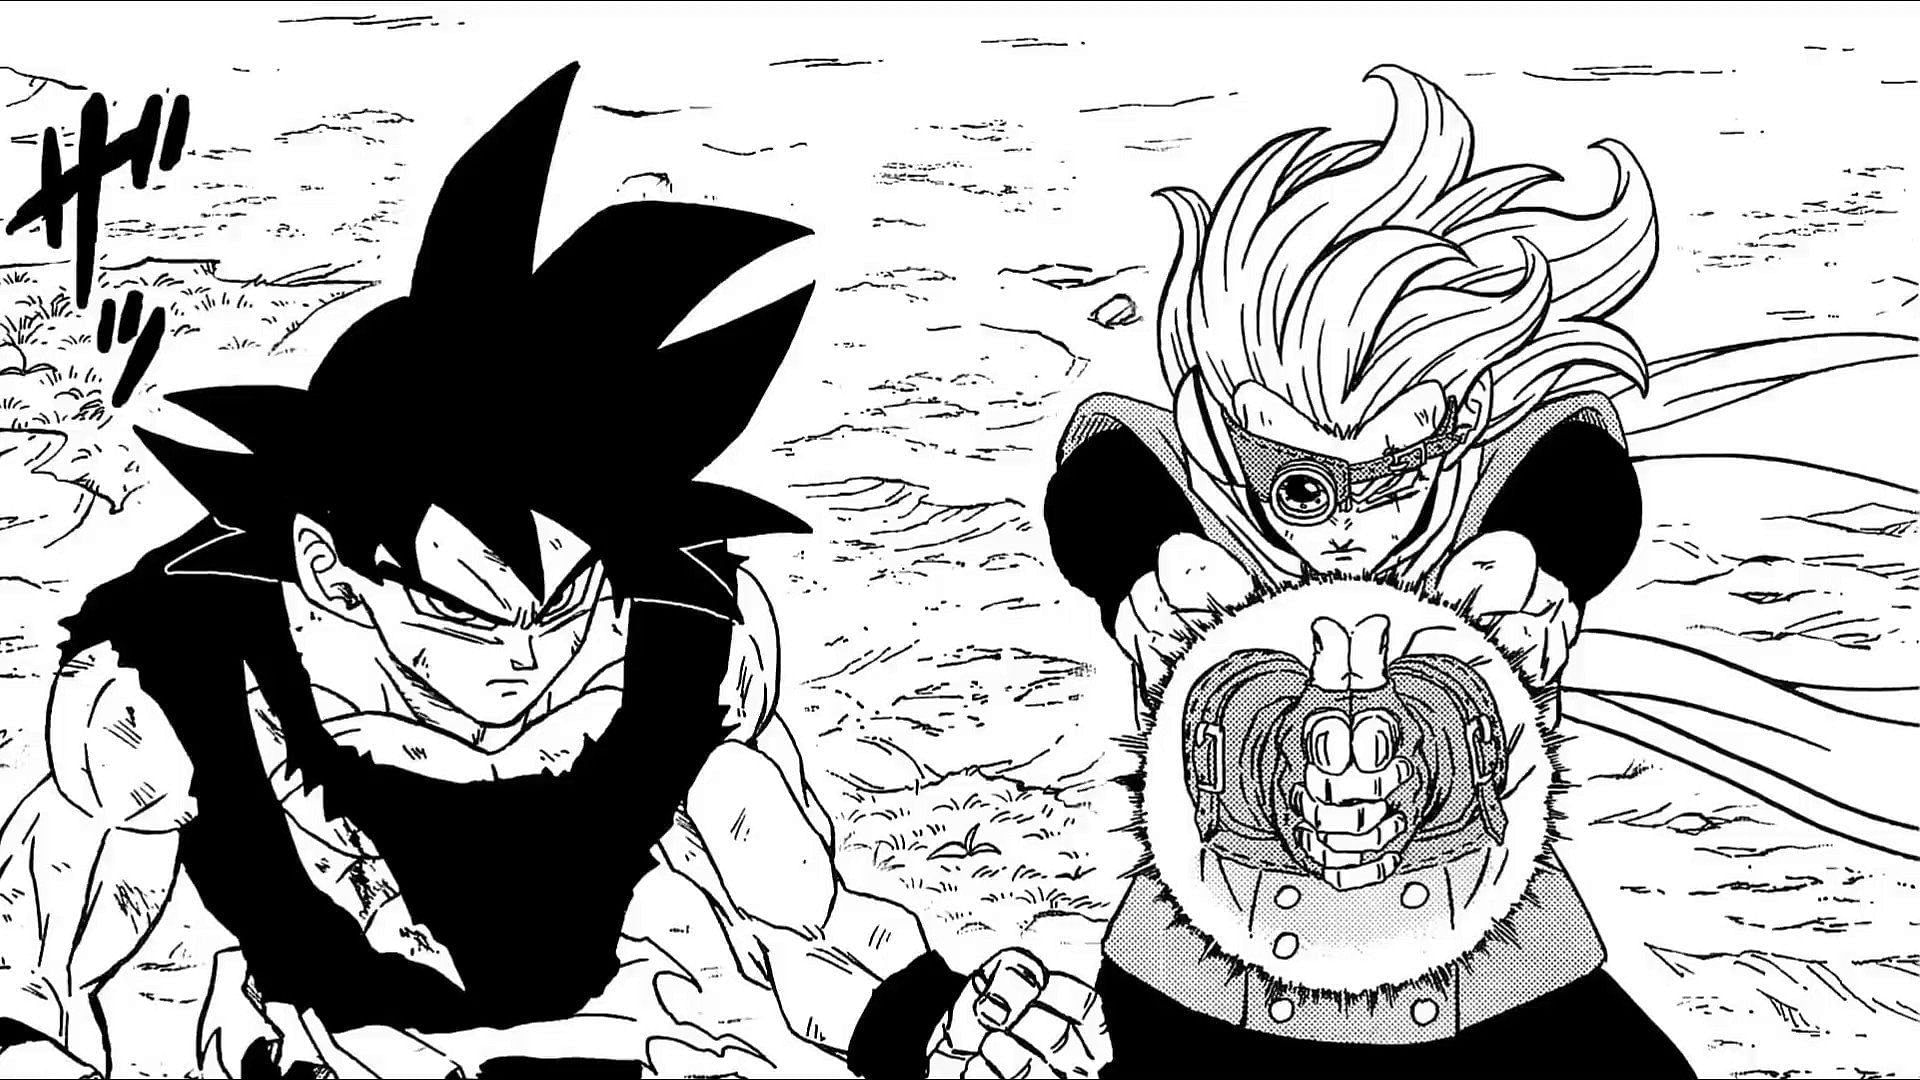 Dragon Ball Super chapter 88: Expected release date, where to read